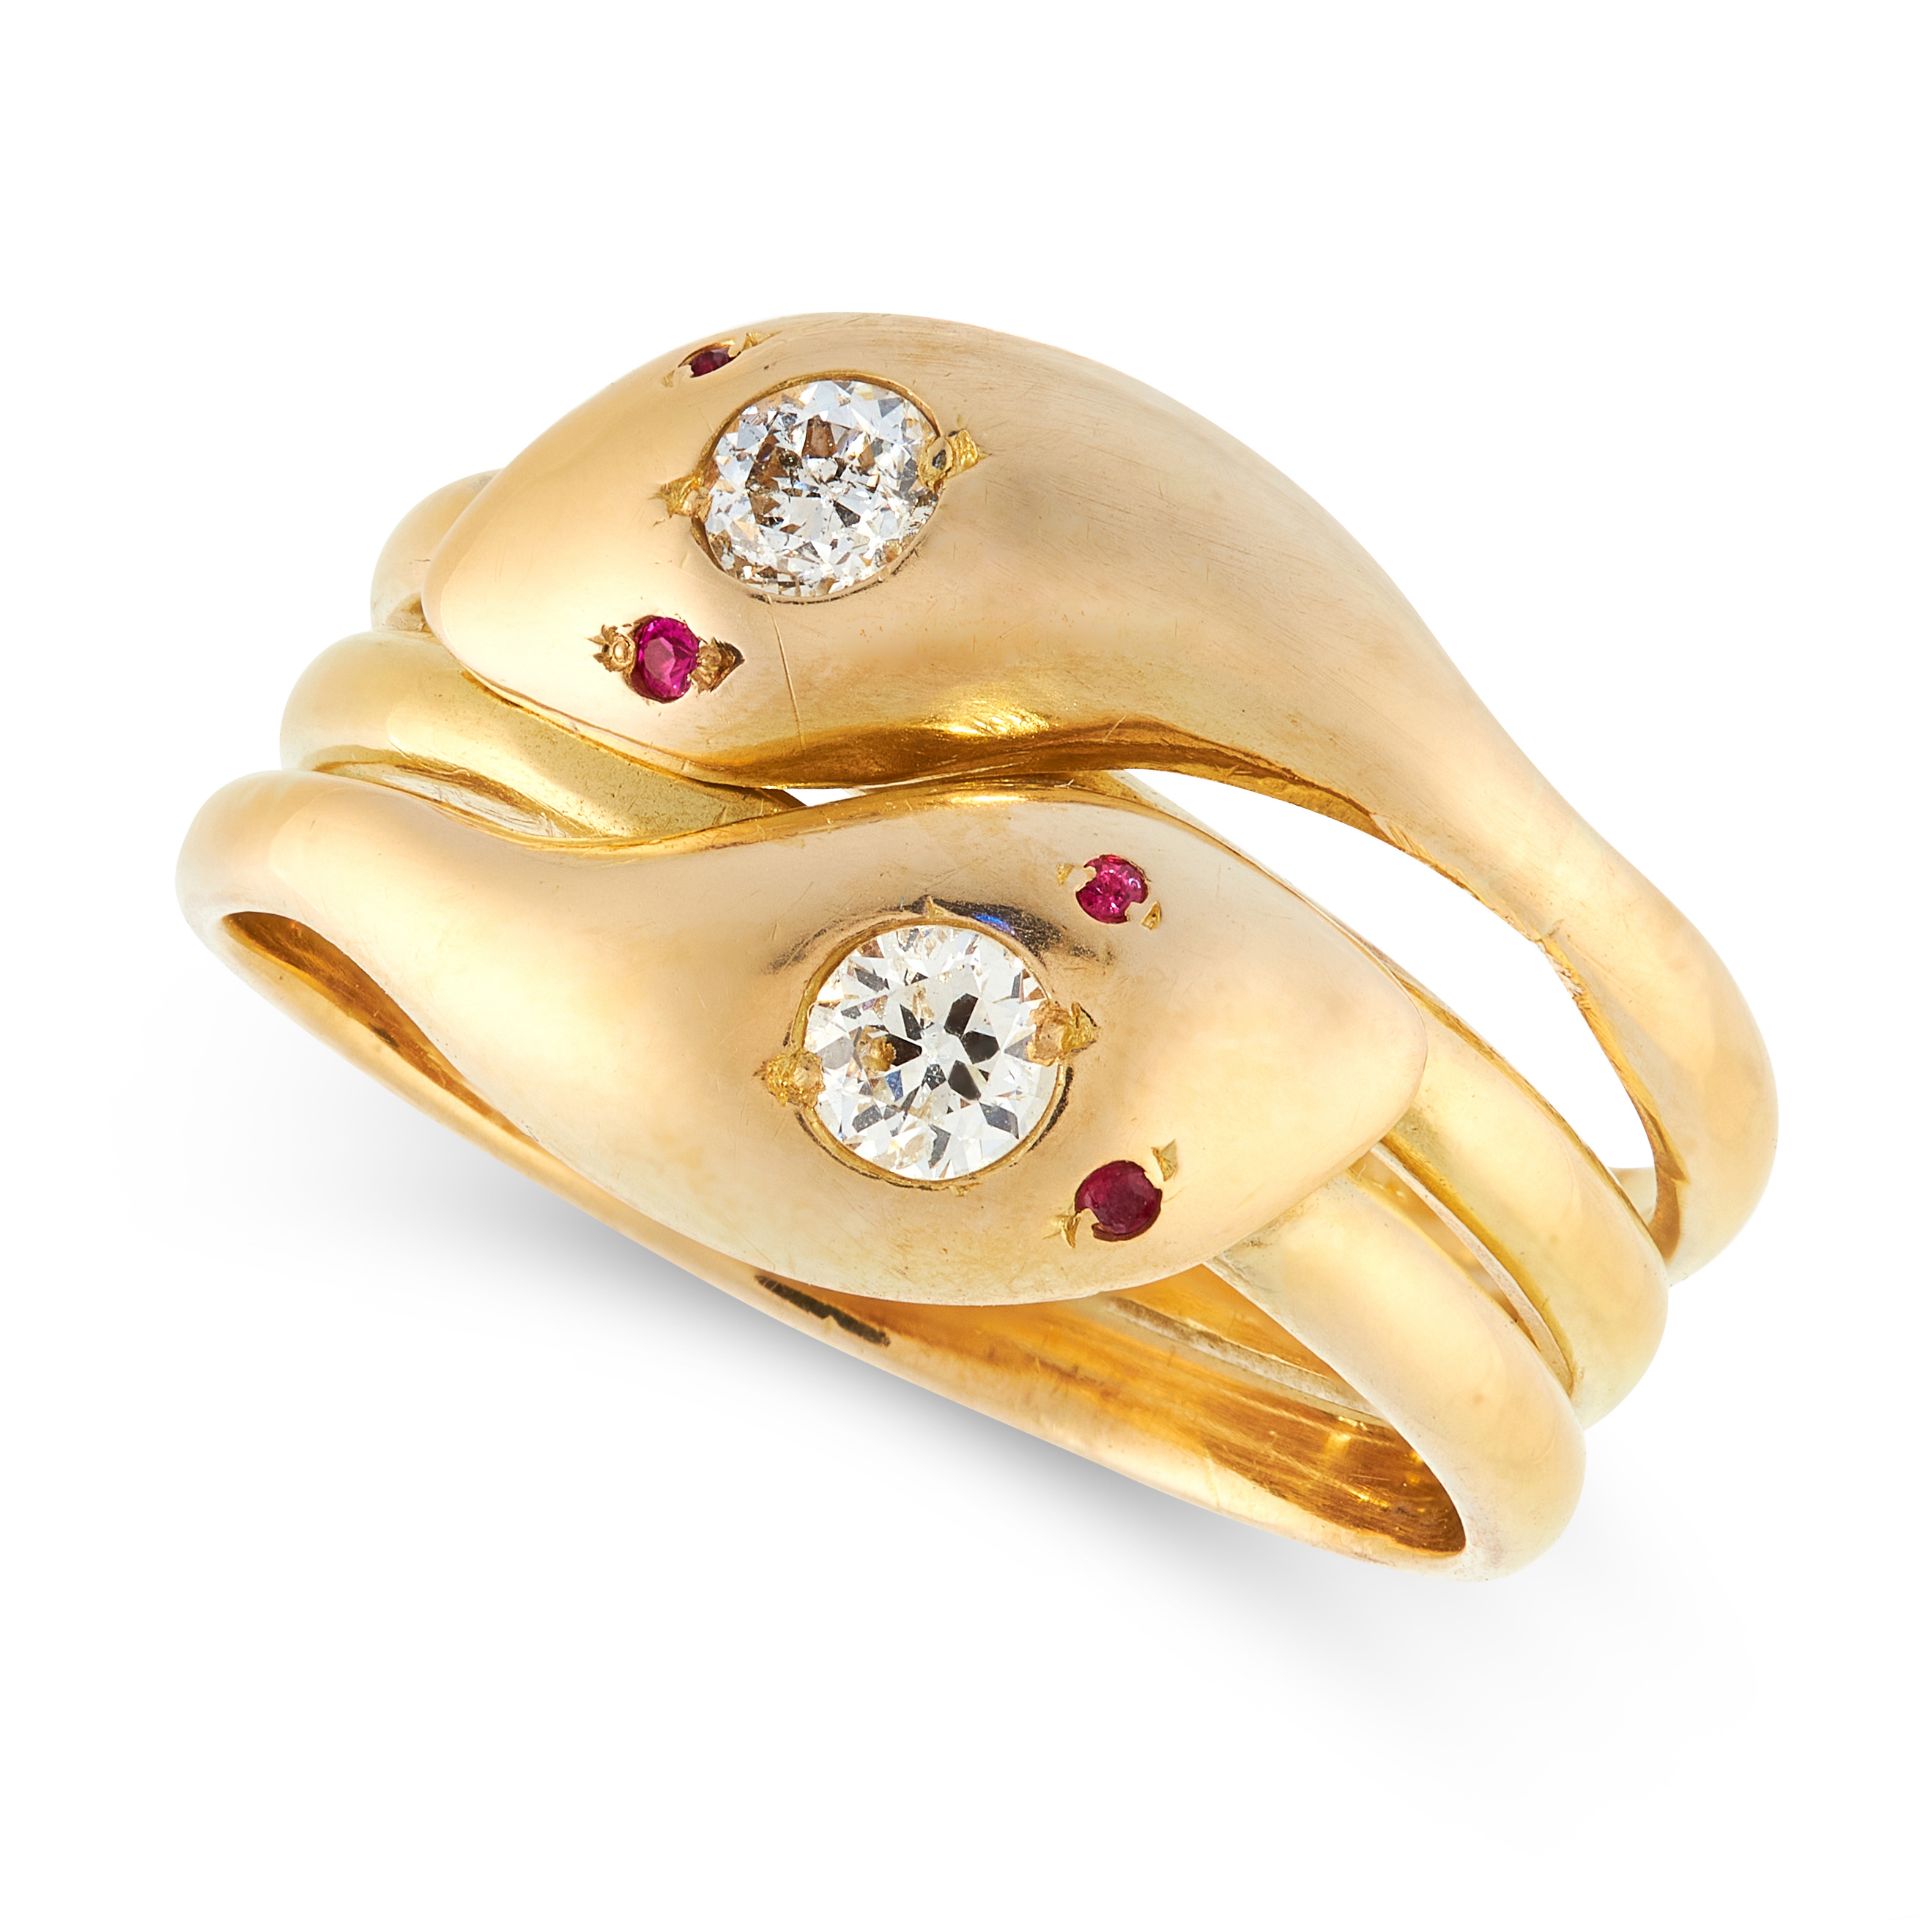 A DIAMOND AND RUBY SNAKE RING in 18ct yellow gold, designed as two snakes, their bodies woven around